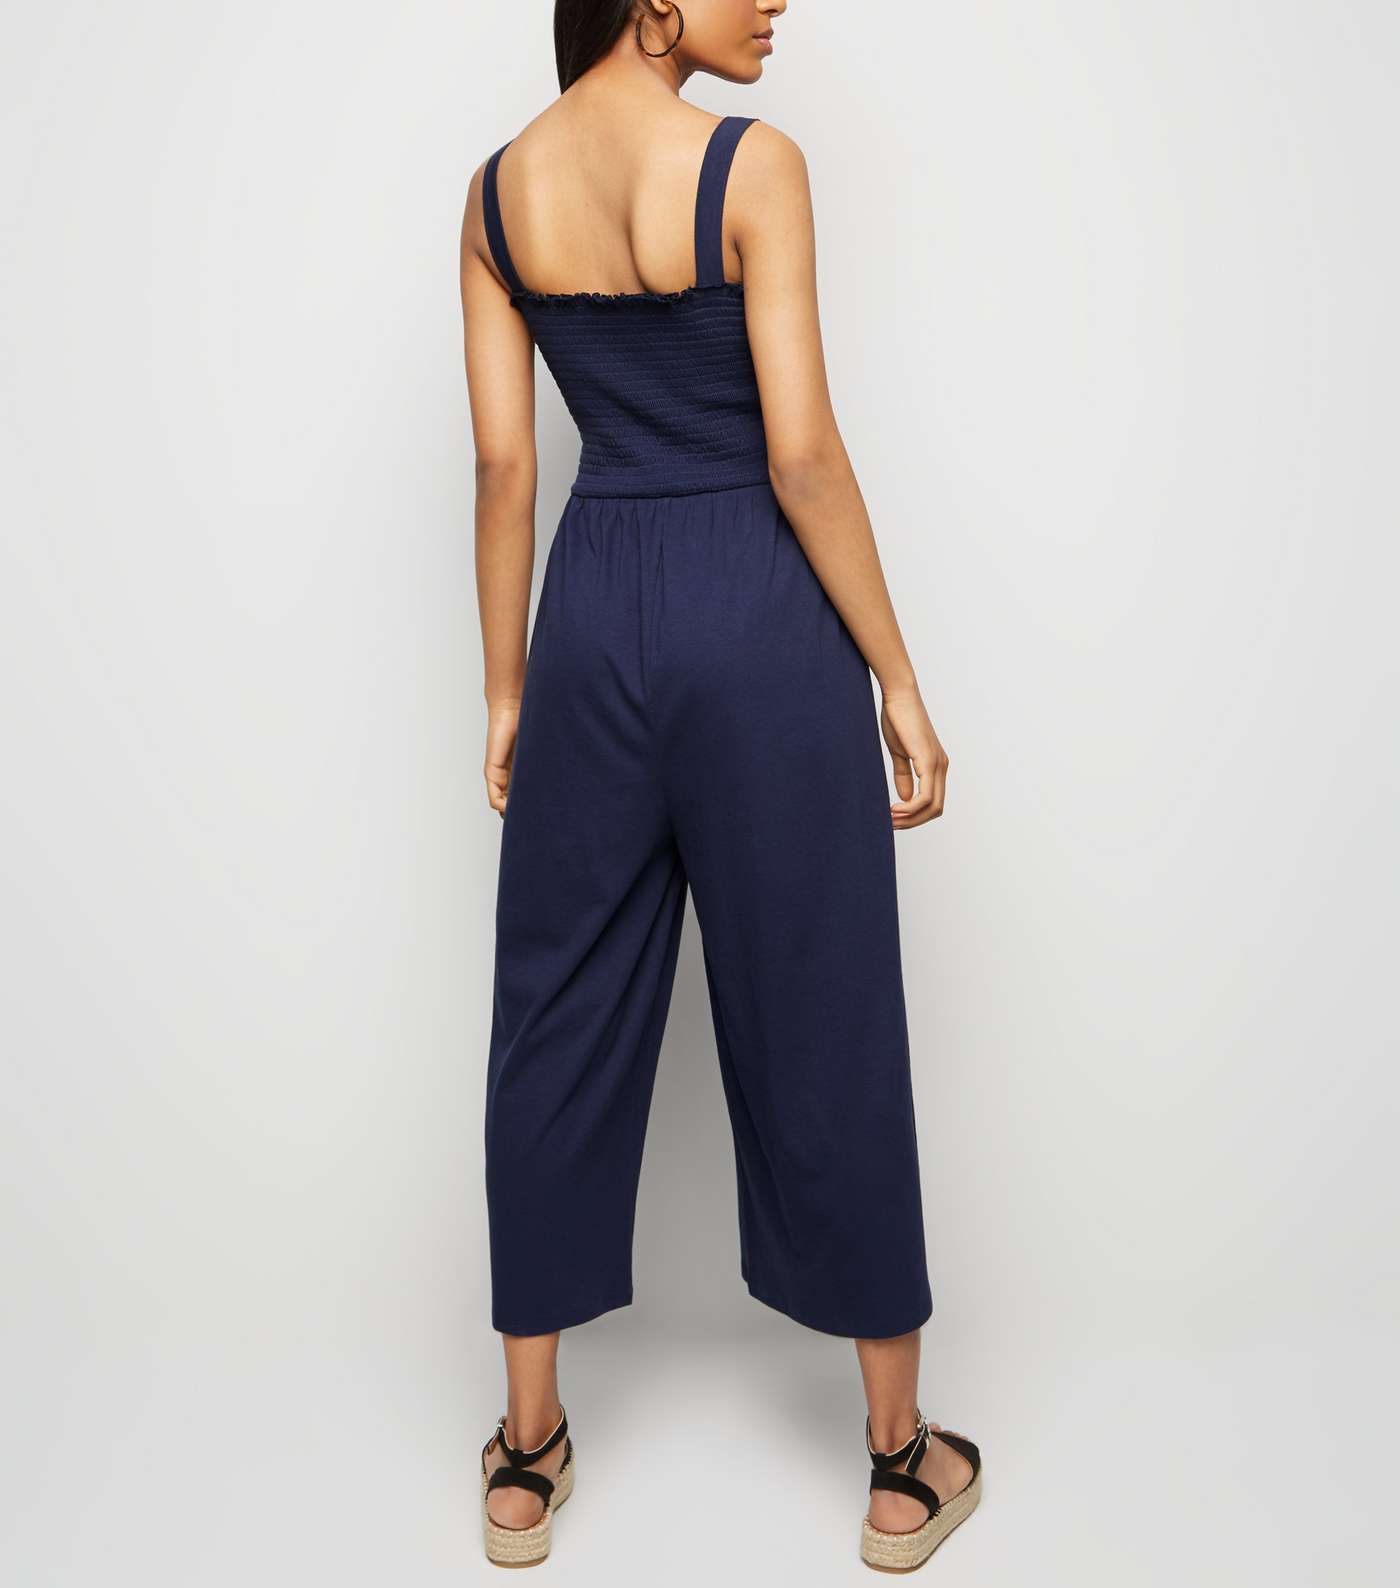 Petite Navy Shirred Top Jersey Jumpsuit Image 3